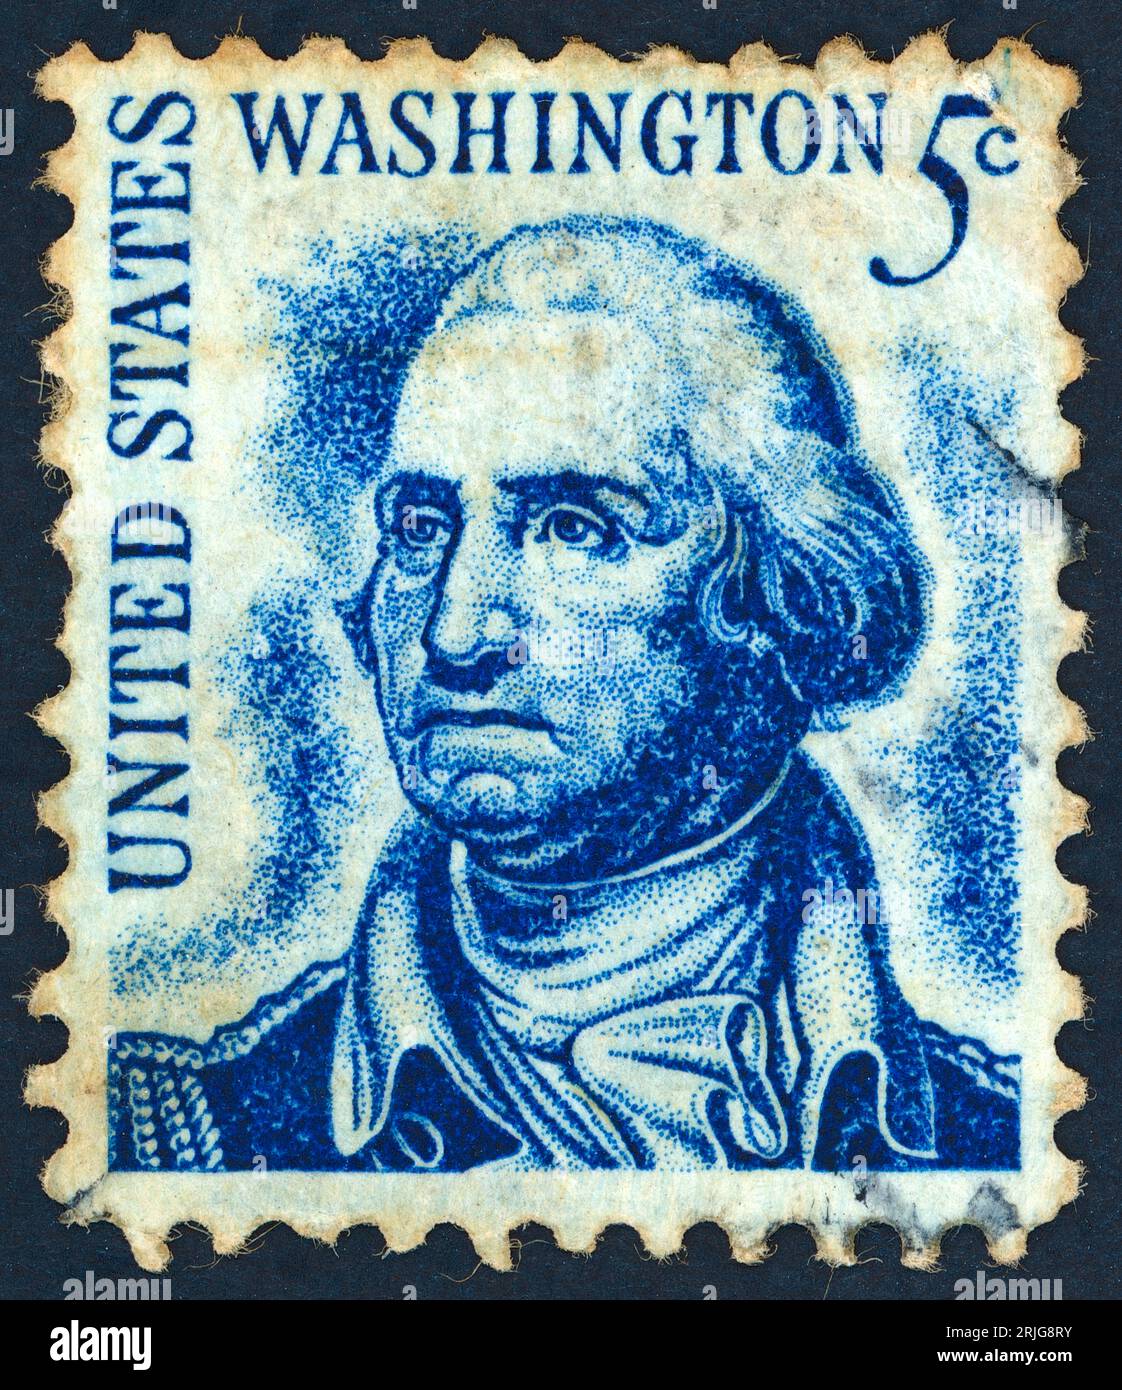 George Washington (1732 – 1799). Postage stamp issued in the US in 1966. George Washington, also called Father of His Country was an American general and commander in chief of the colonial armies in the American Revolution (1775–83) and subsequently first president of the United States (1789–97). Stock Photo